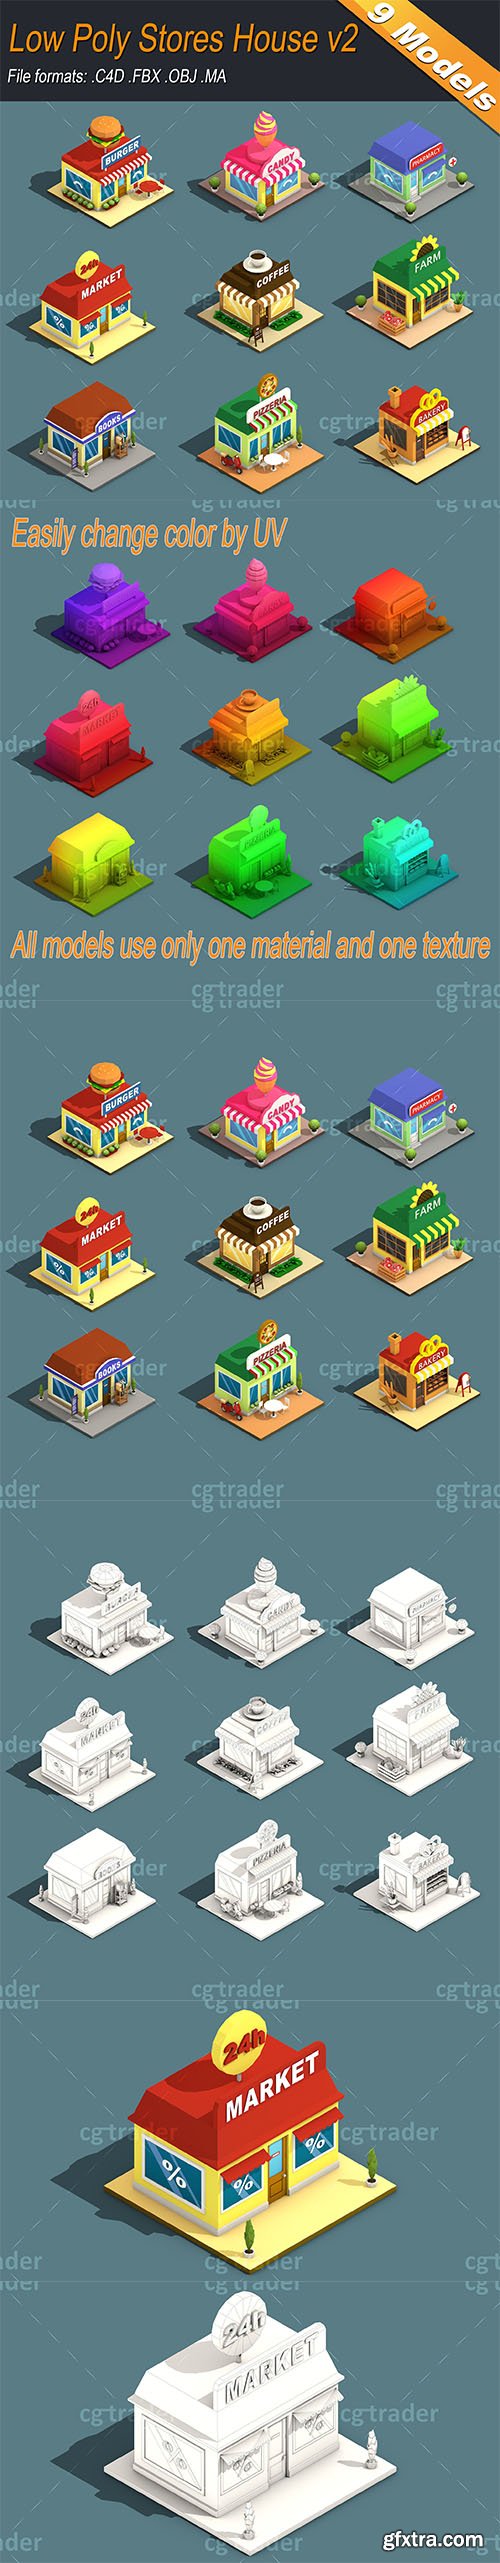 Cgtrader - Low Poly Stores House ver 2 Isometric Low-poly 3D model